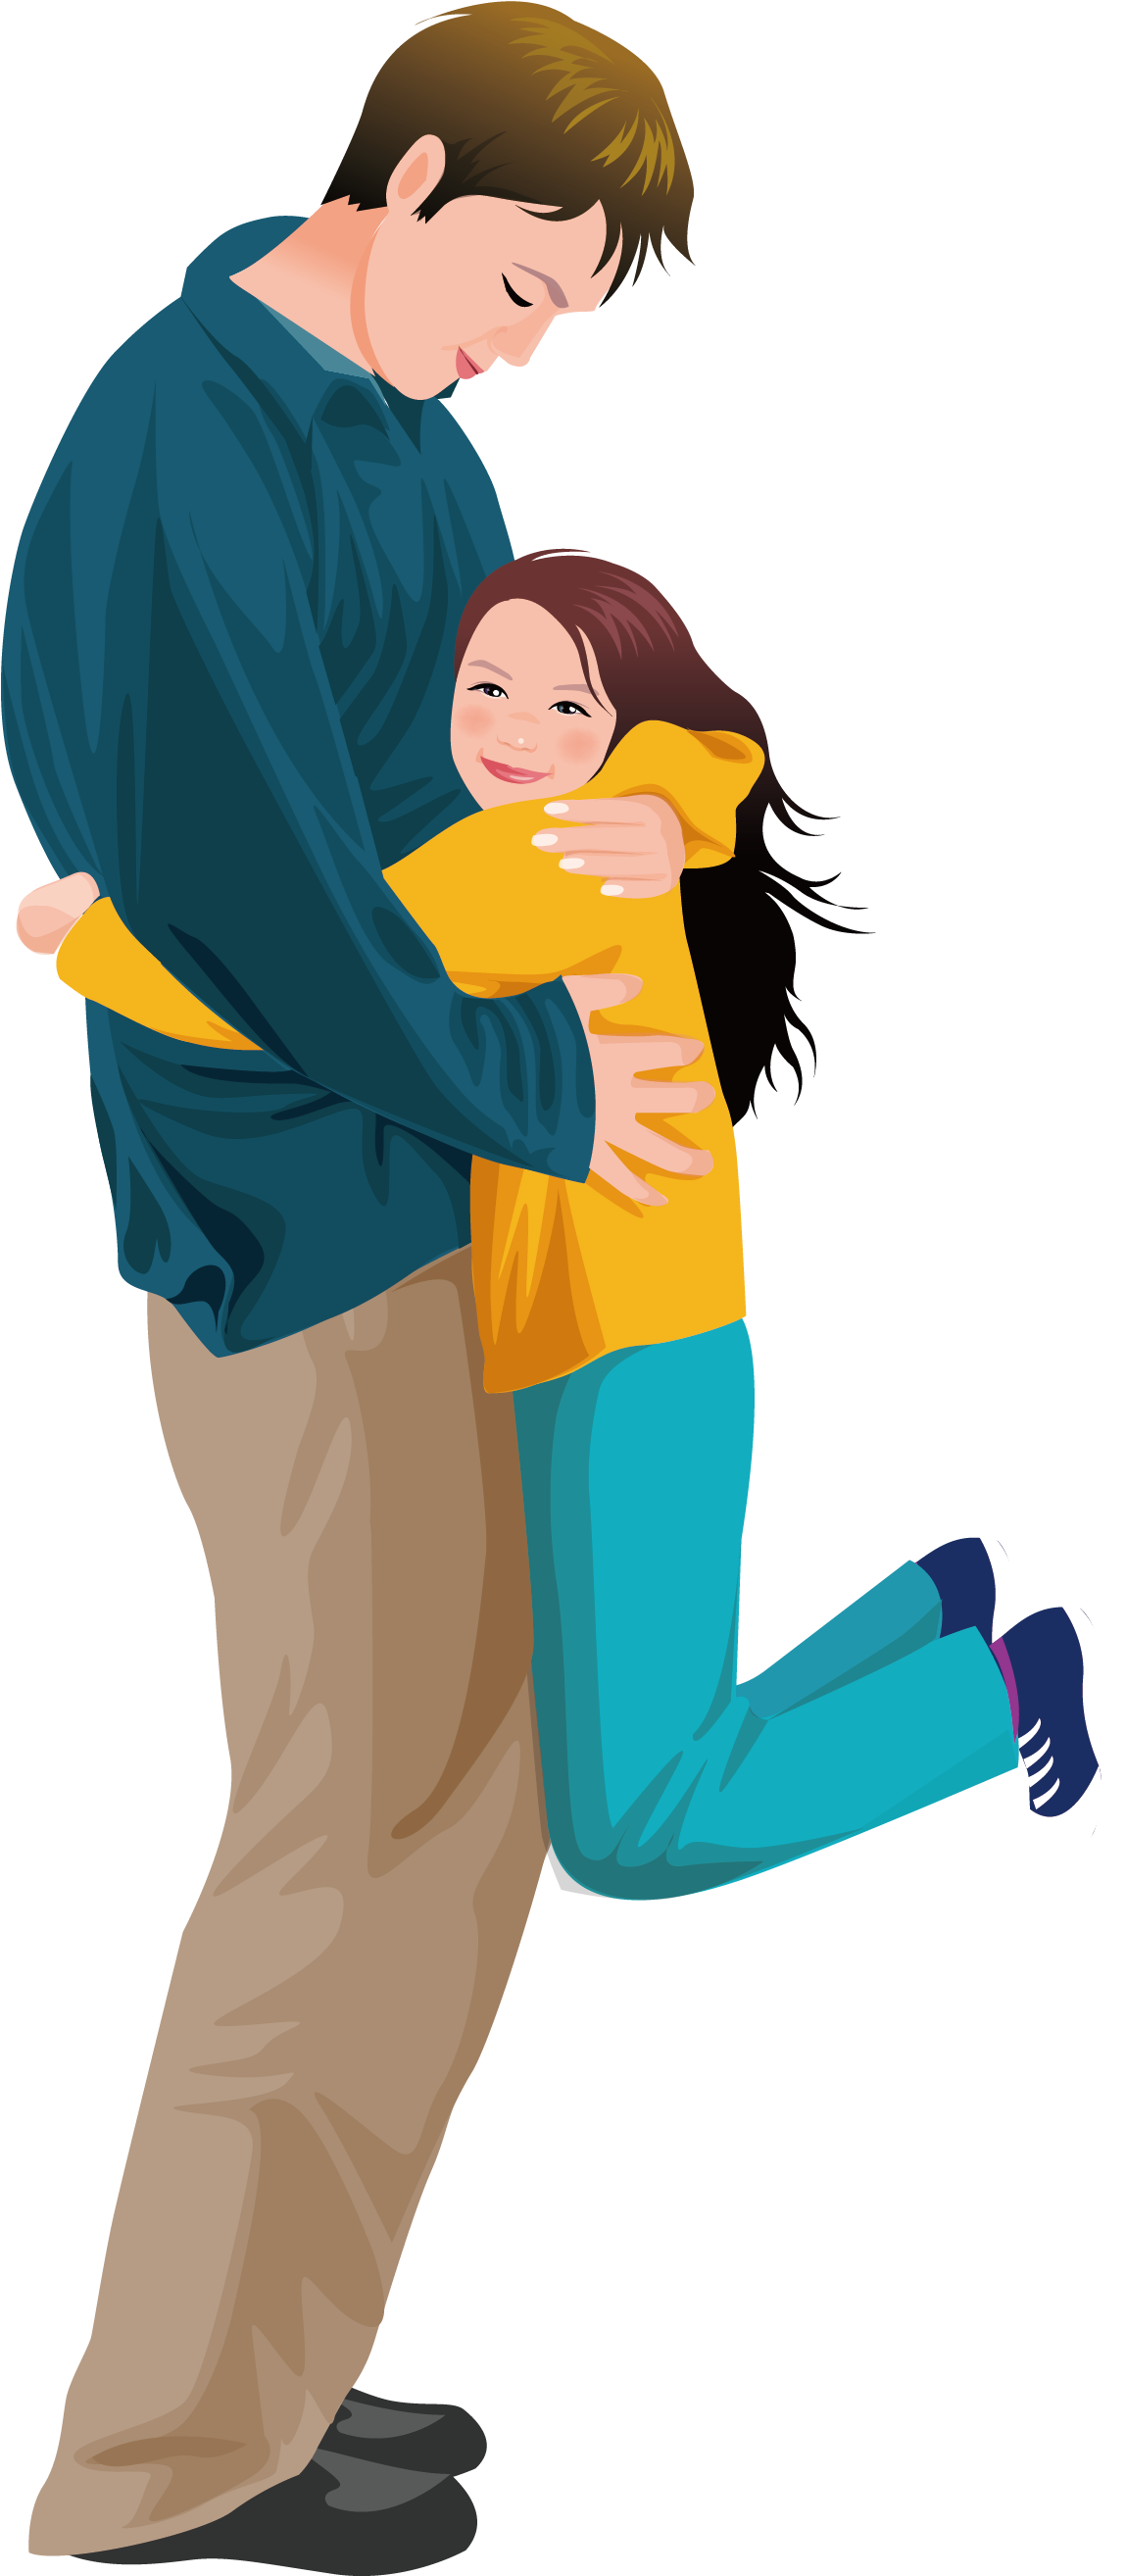 Father Daughter Hug Girl Illustration - Father And Daughter Illustration (2480x3508)